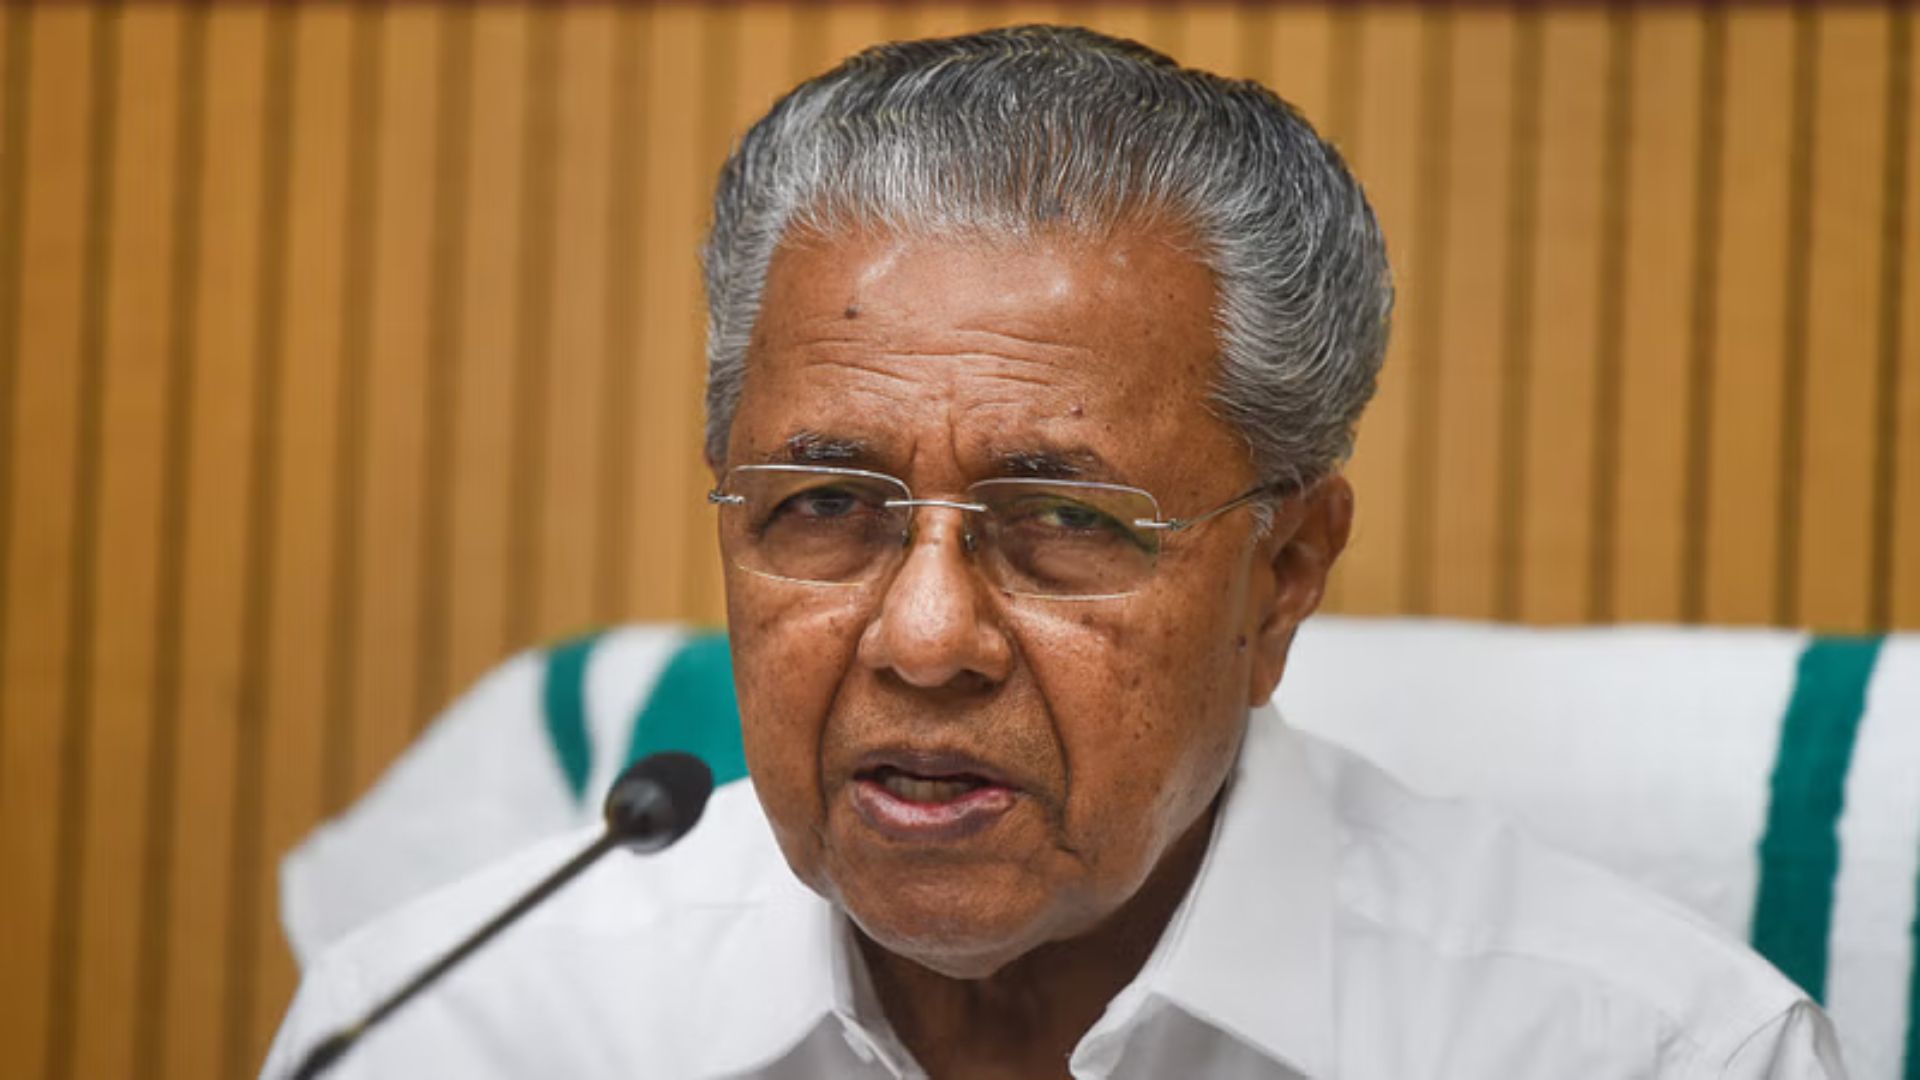 Shoes hurled at Kerala CM’s convoy, black flags displayed to Governor at separate protests